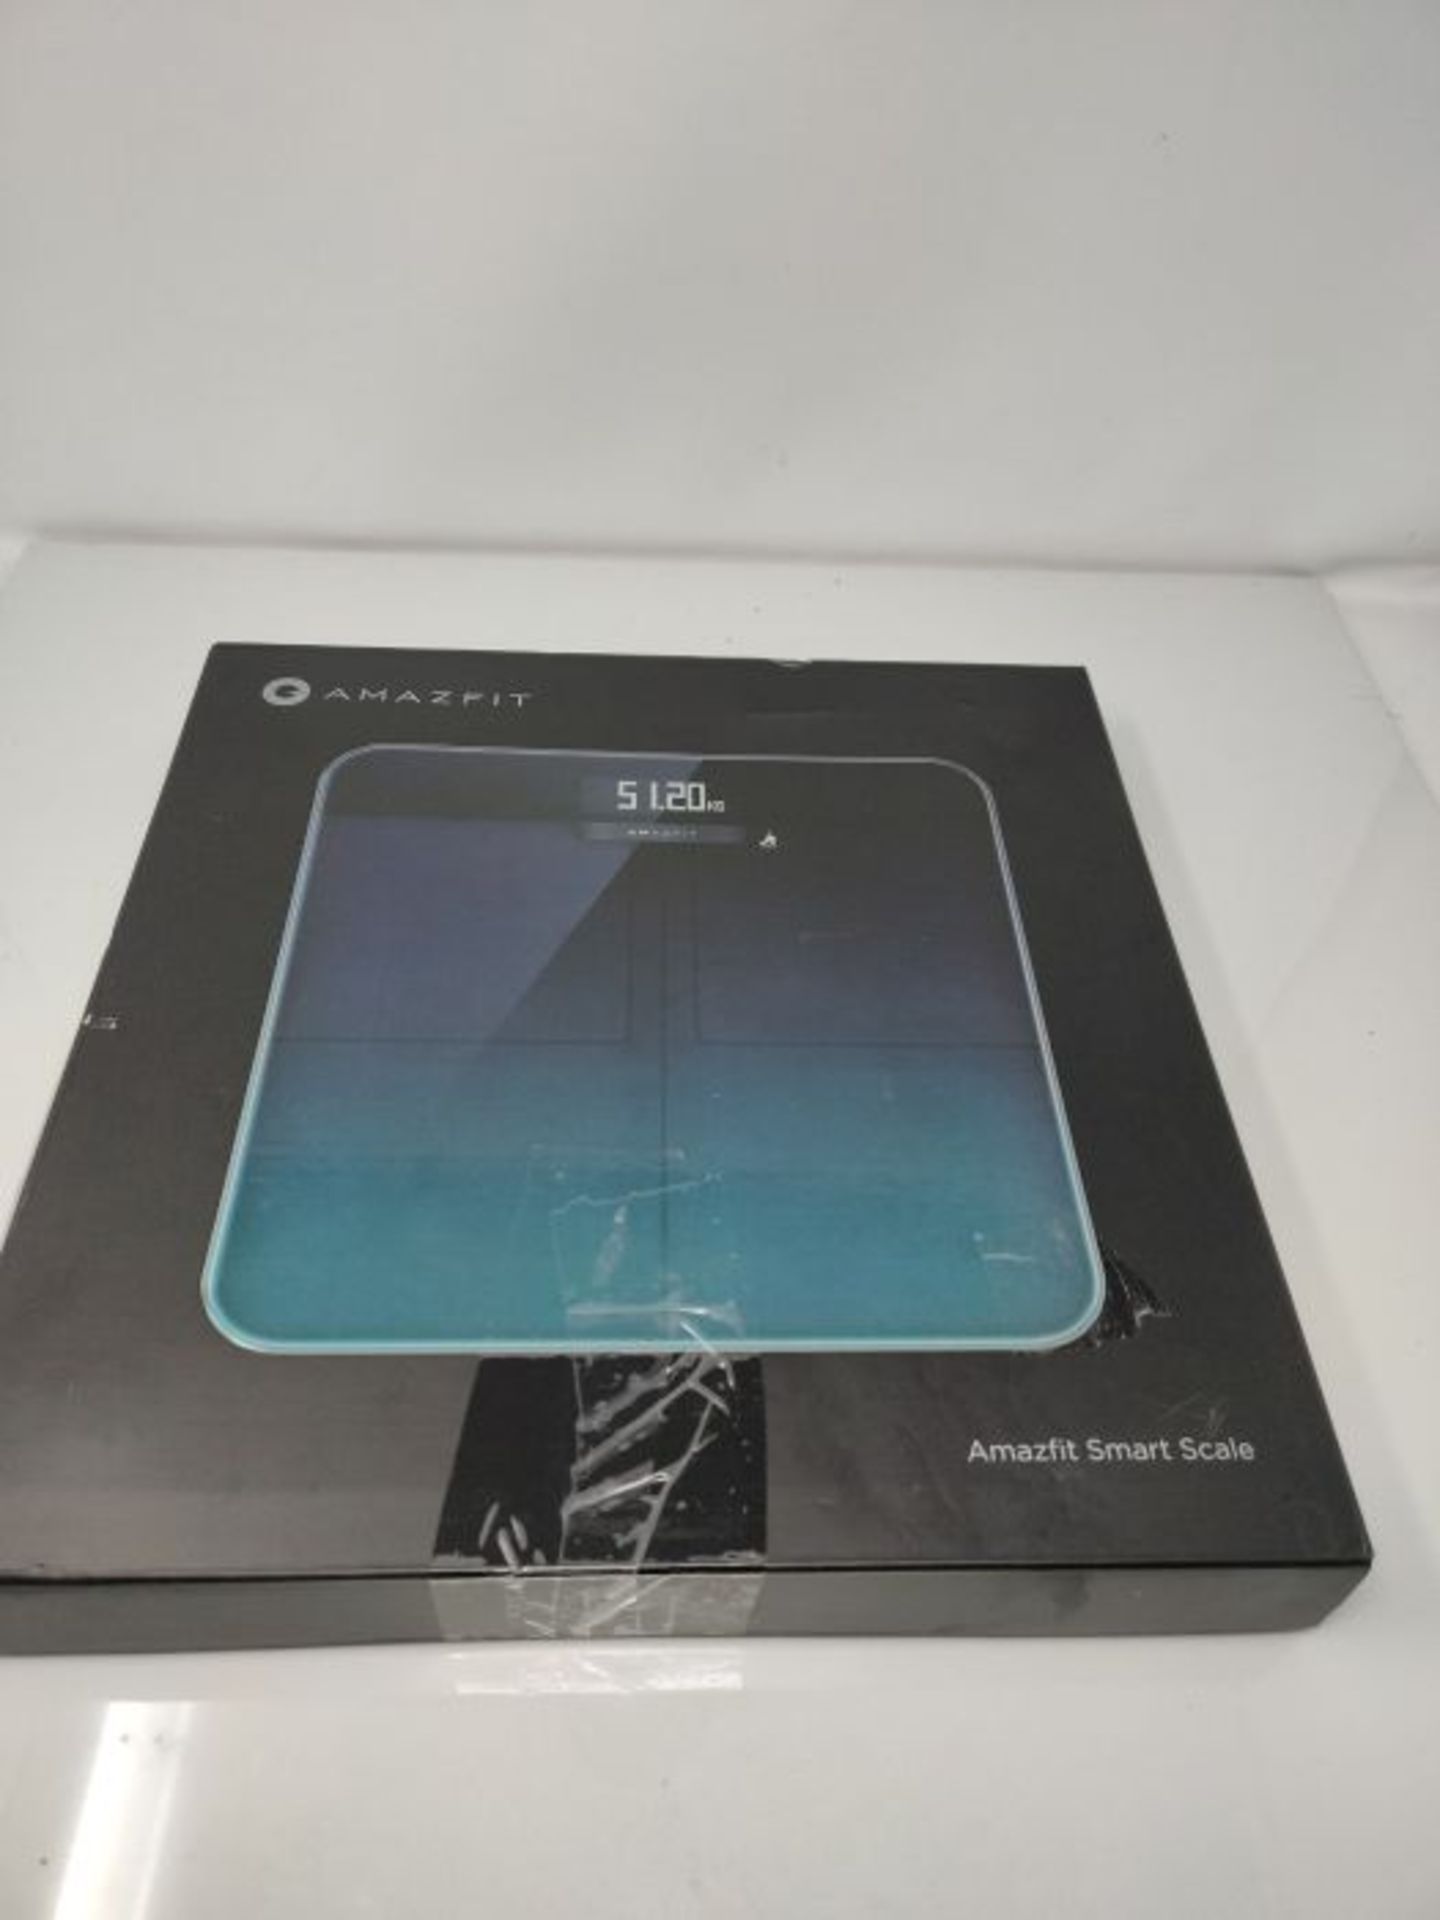 Amazfit Body Composition Smart Scale, Digital Bathroom Scale, Body Weight Monitor, Bod - Image 2 of 3